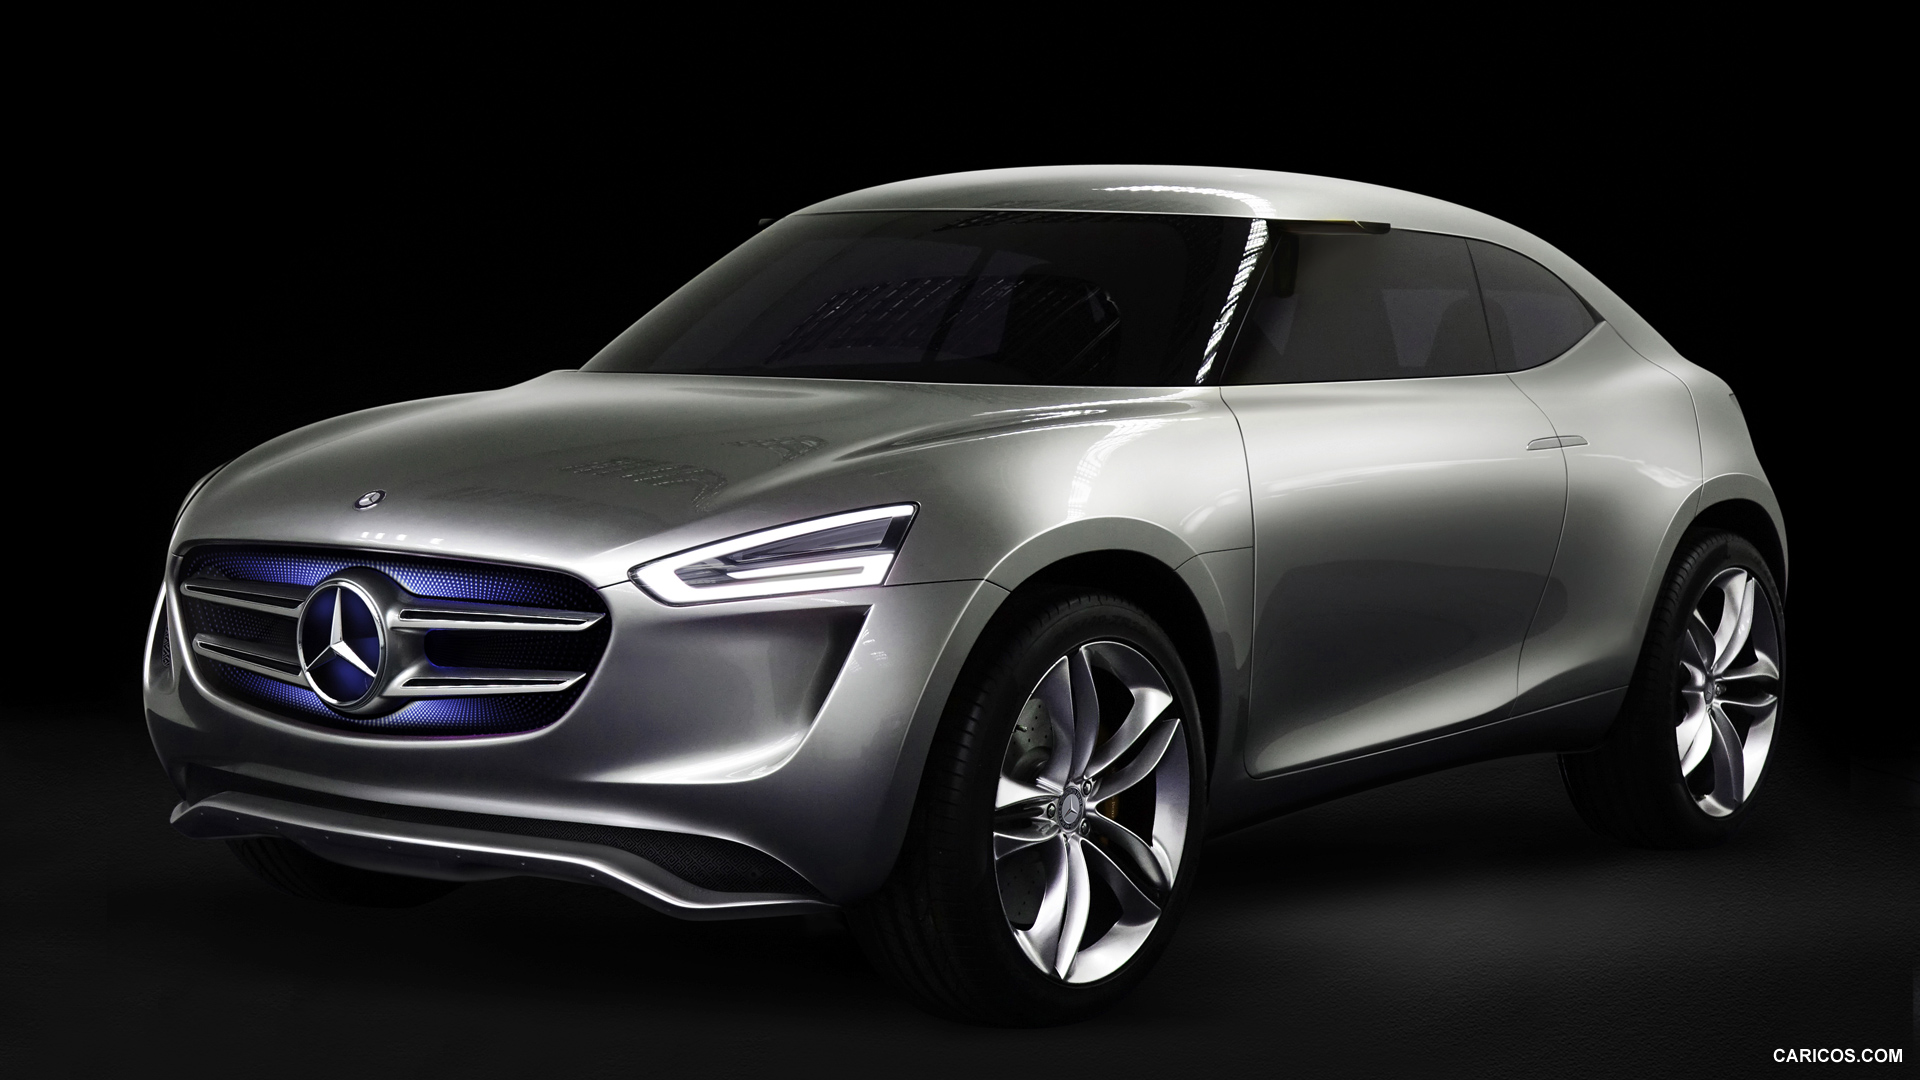 2014 Mercedes-Benz Vision G-Code SUC Concept  - Front, #11 of 19